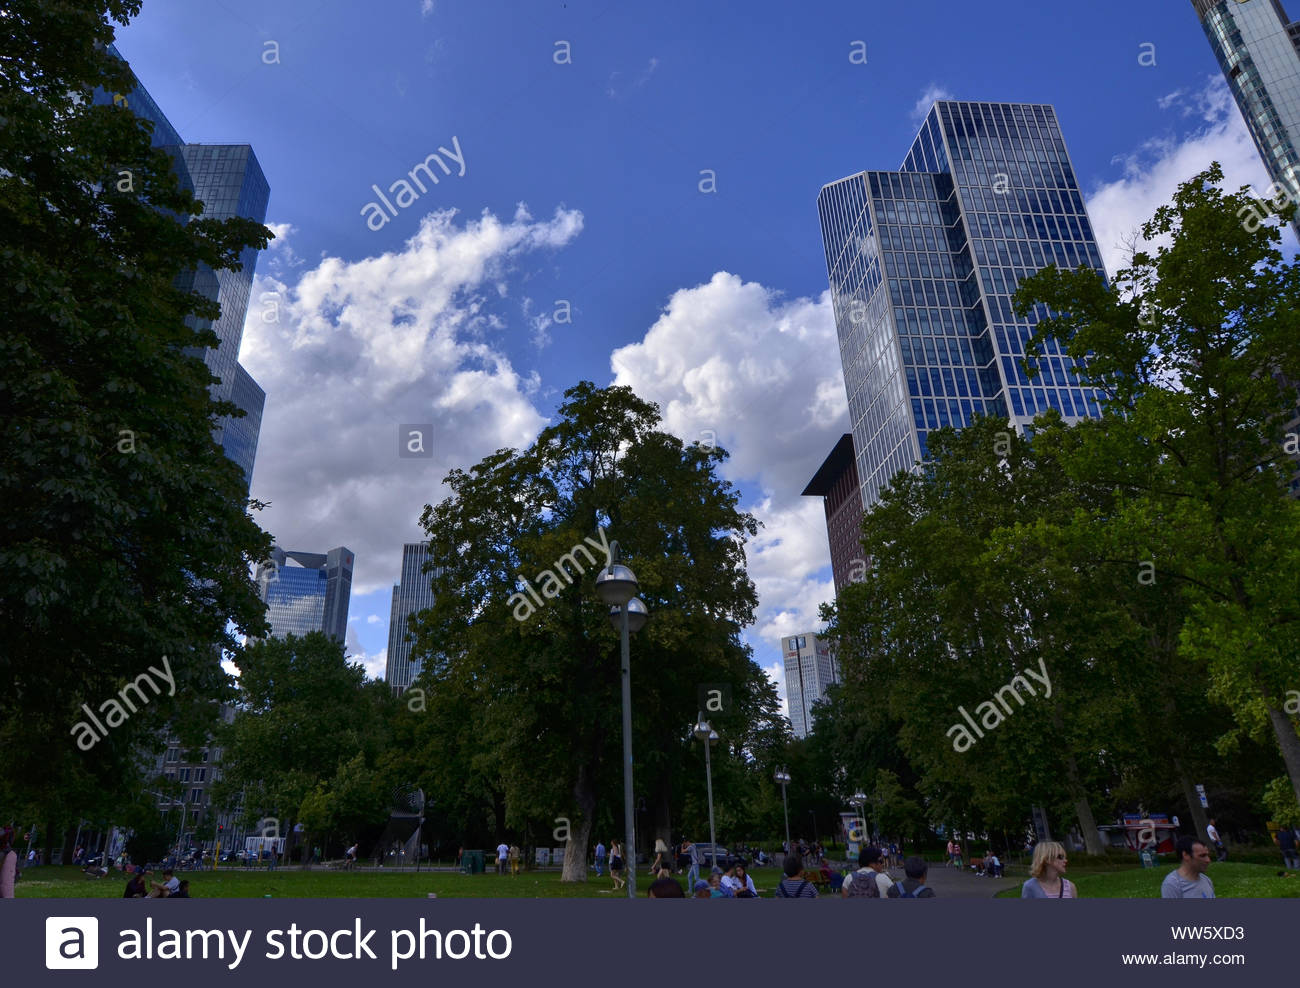 frankfurt am main germany august 2019 the financial district is characterized by the greenery surrounding the numerous skyscrapers with mirrored fa WW5XD3